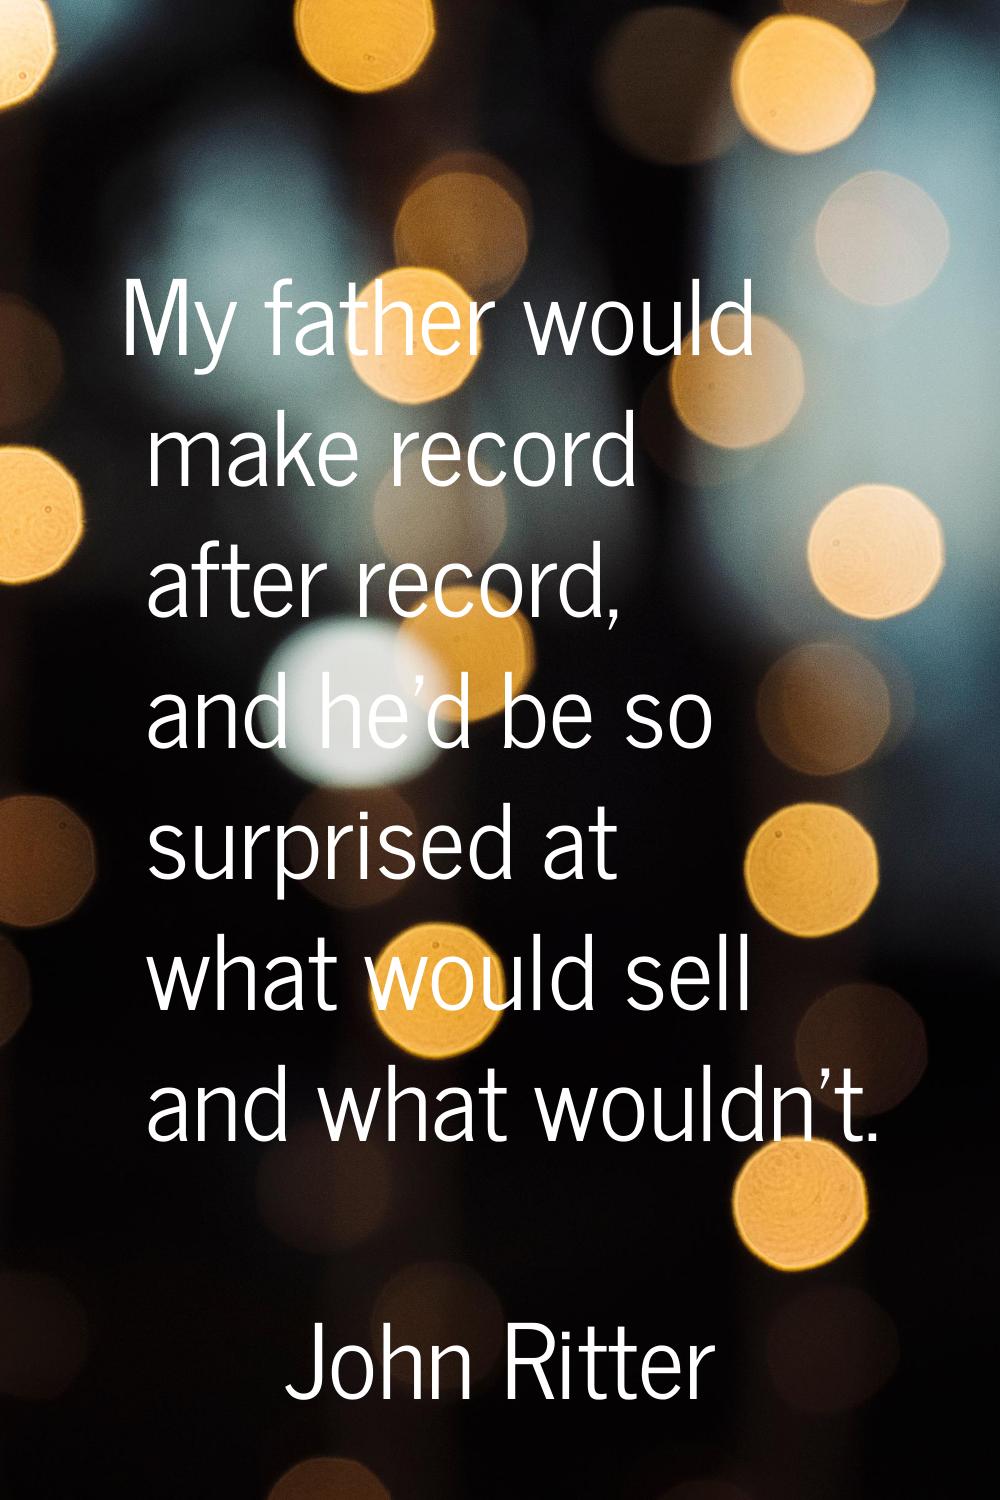 My father would make record after record, and he'd be so surprised at what would sell and what woul